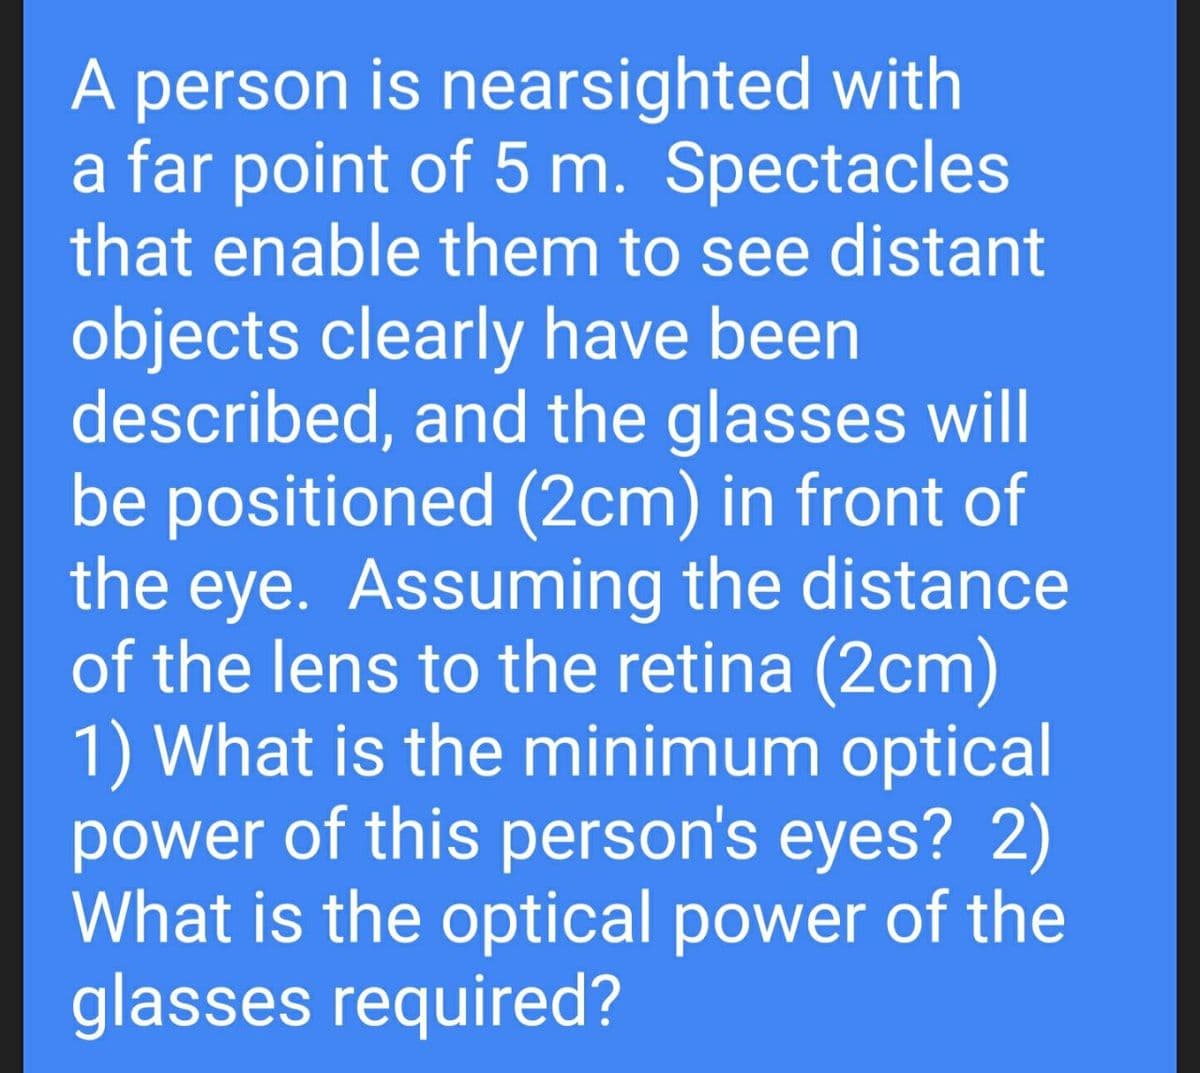 A person is nearsighted with
a far point of 5 m. Spectacles
that enable them to see distant
objects clearly have been
described, and the glasses will
be positioned (2cm) in front of
the eye. Assuming the distance
of the lens to the retina (2cm)
1) What is the minimum optical
power of this person's eyes? 2)
What is the optical power of the
glasses required?
